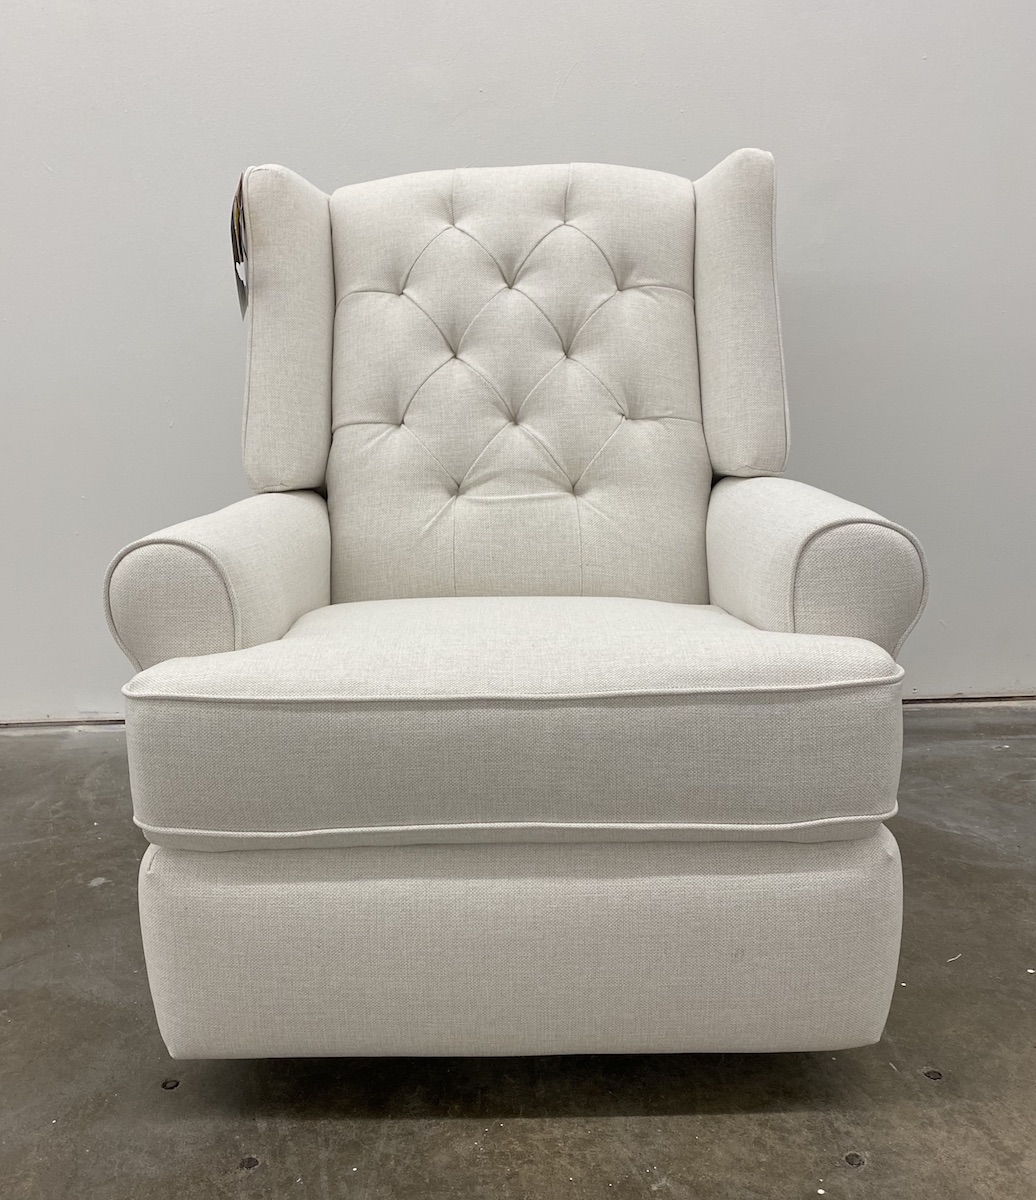 Best Chairs Kendra Tufted Swivel Glider Recliner in Snow